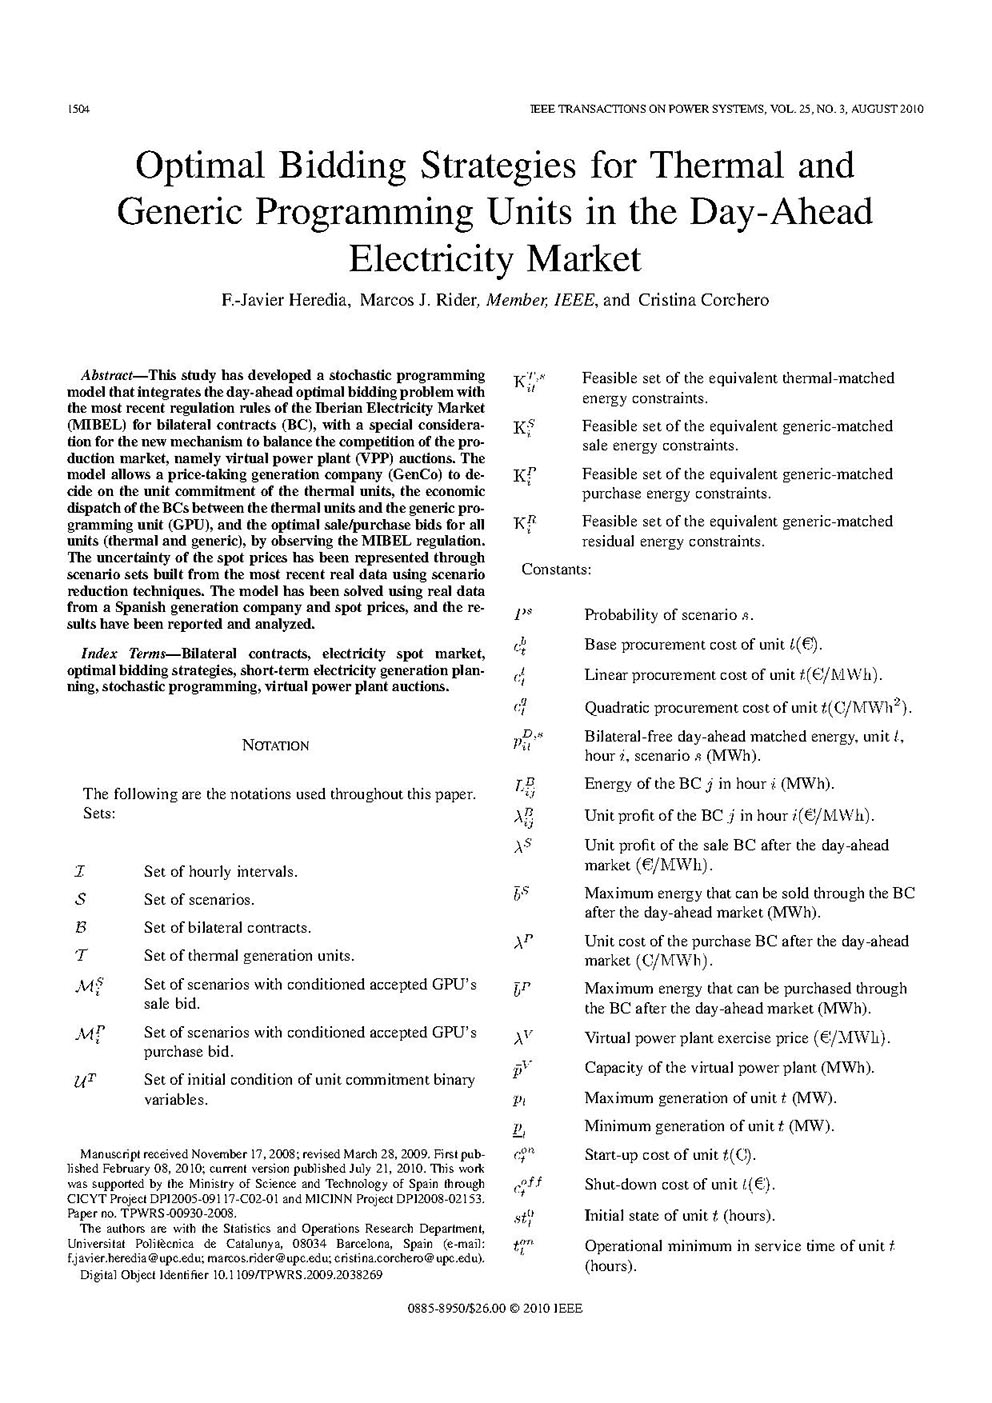 Optimal Bidding Strategies for Thermal and Generic Programming Units in the Day-Ahead  Electricity Market